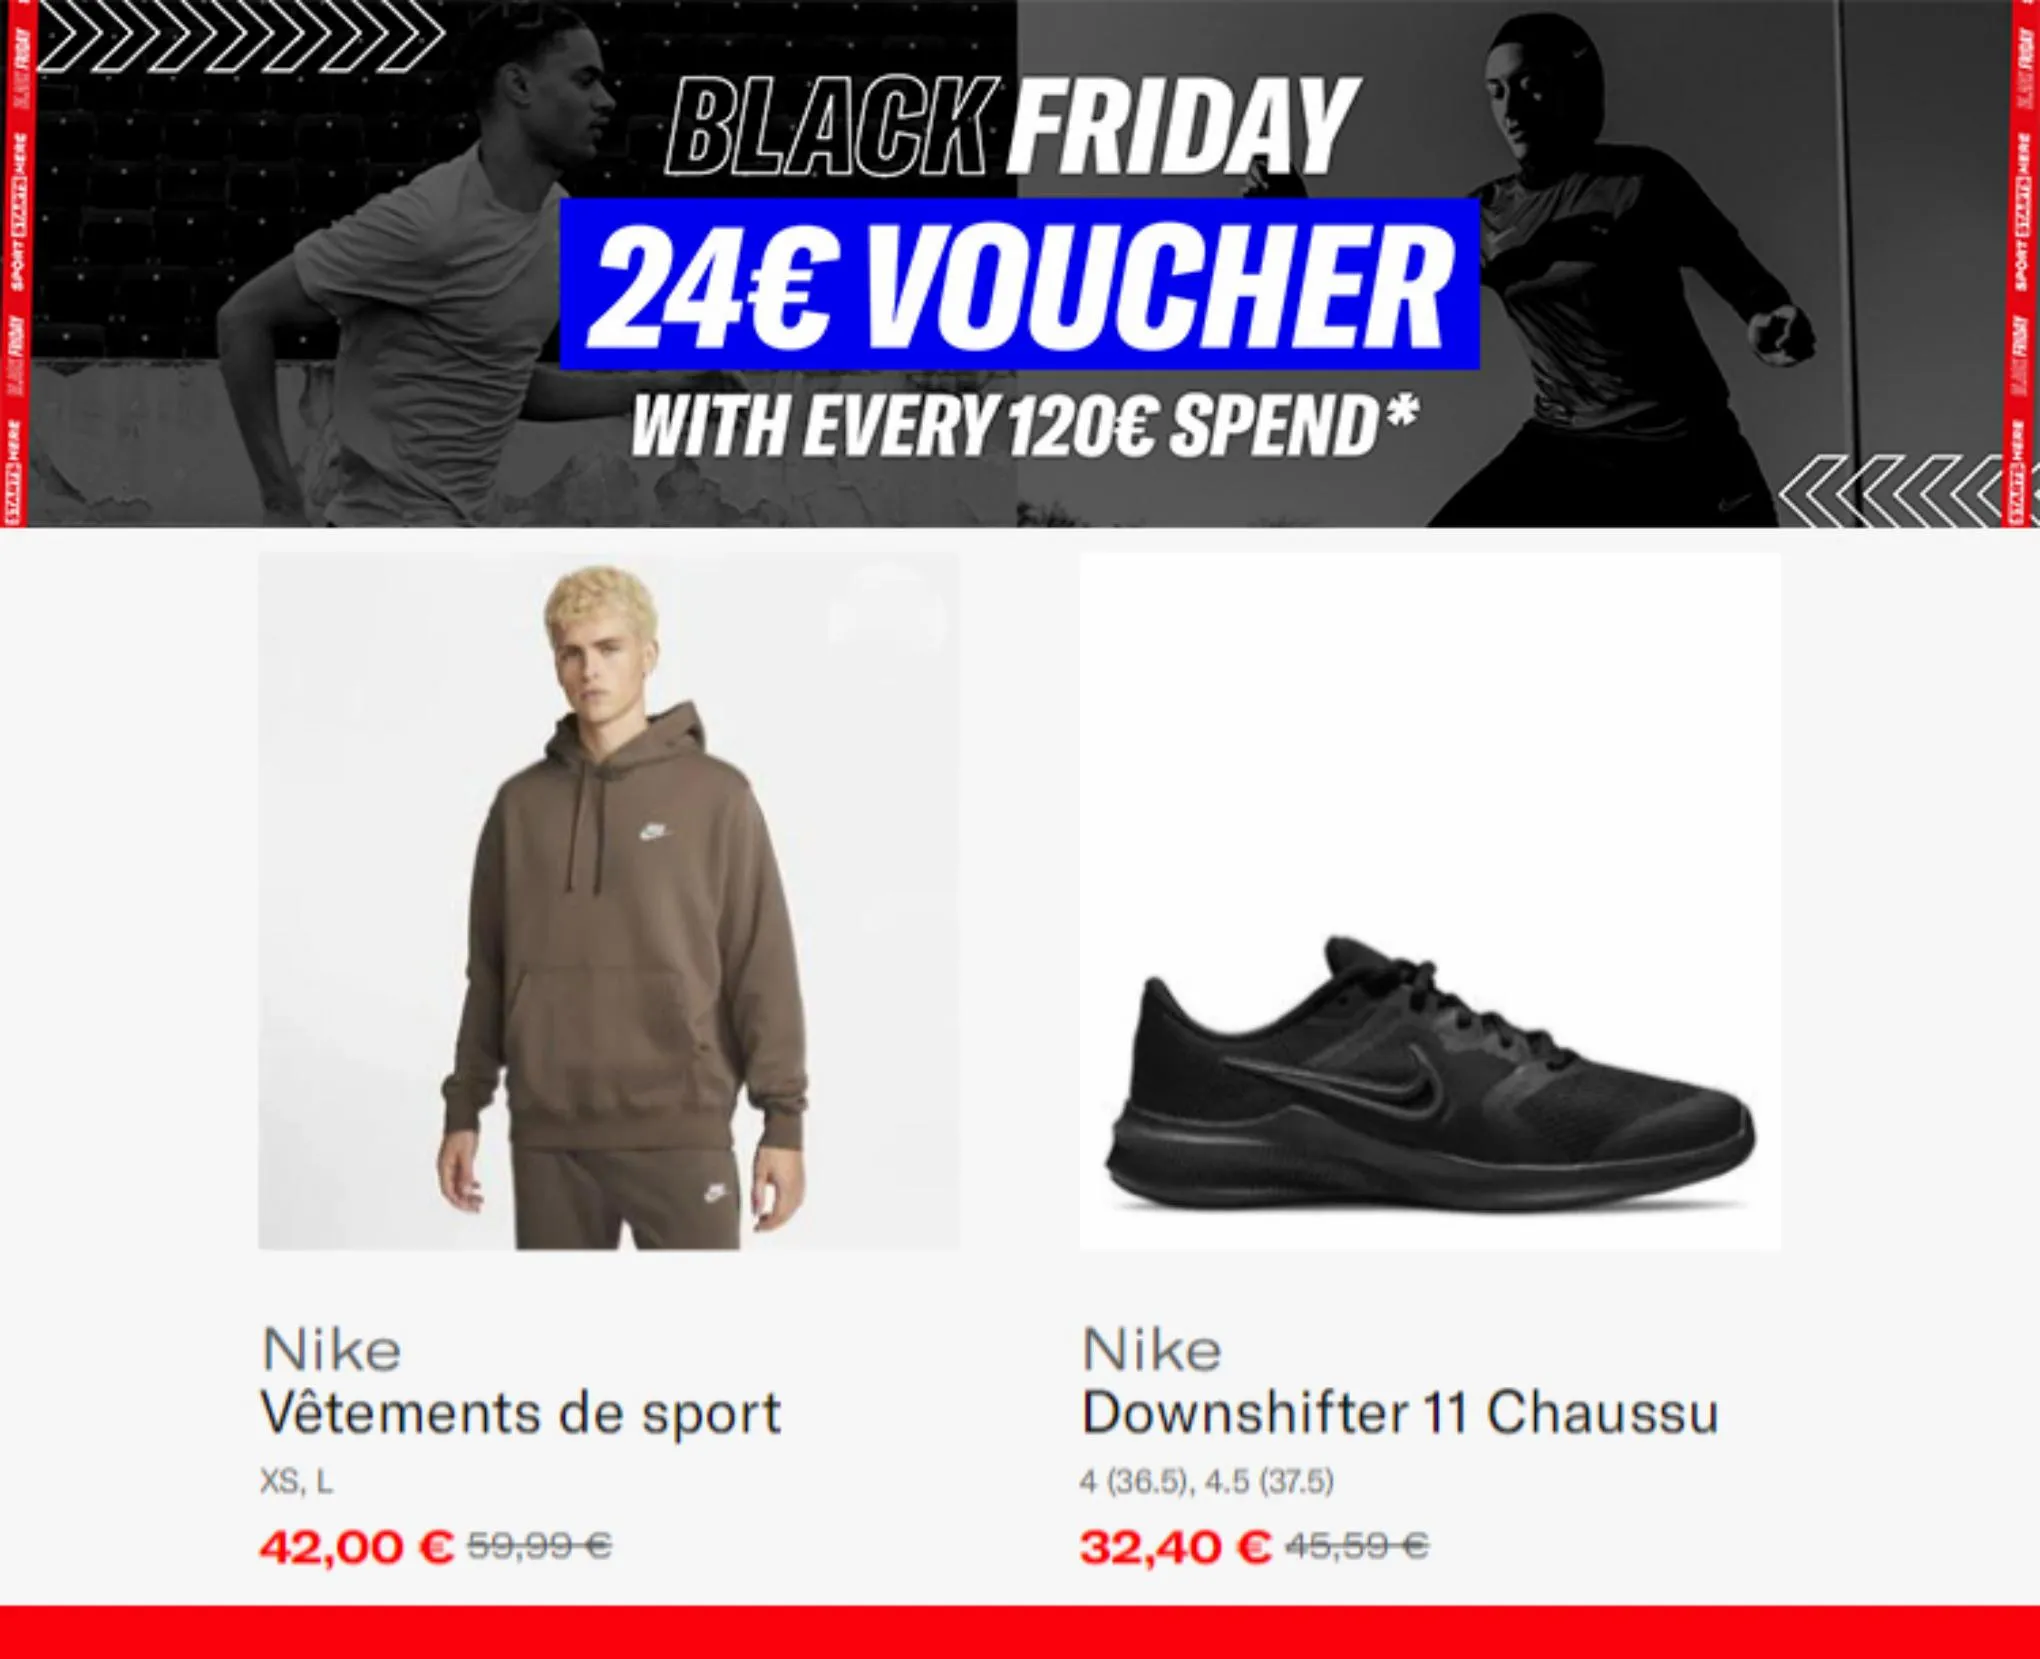 Catalogue Offres Sports direct Black Friday, page 00005